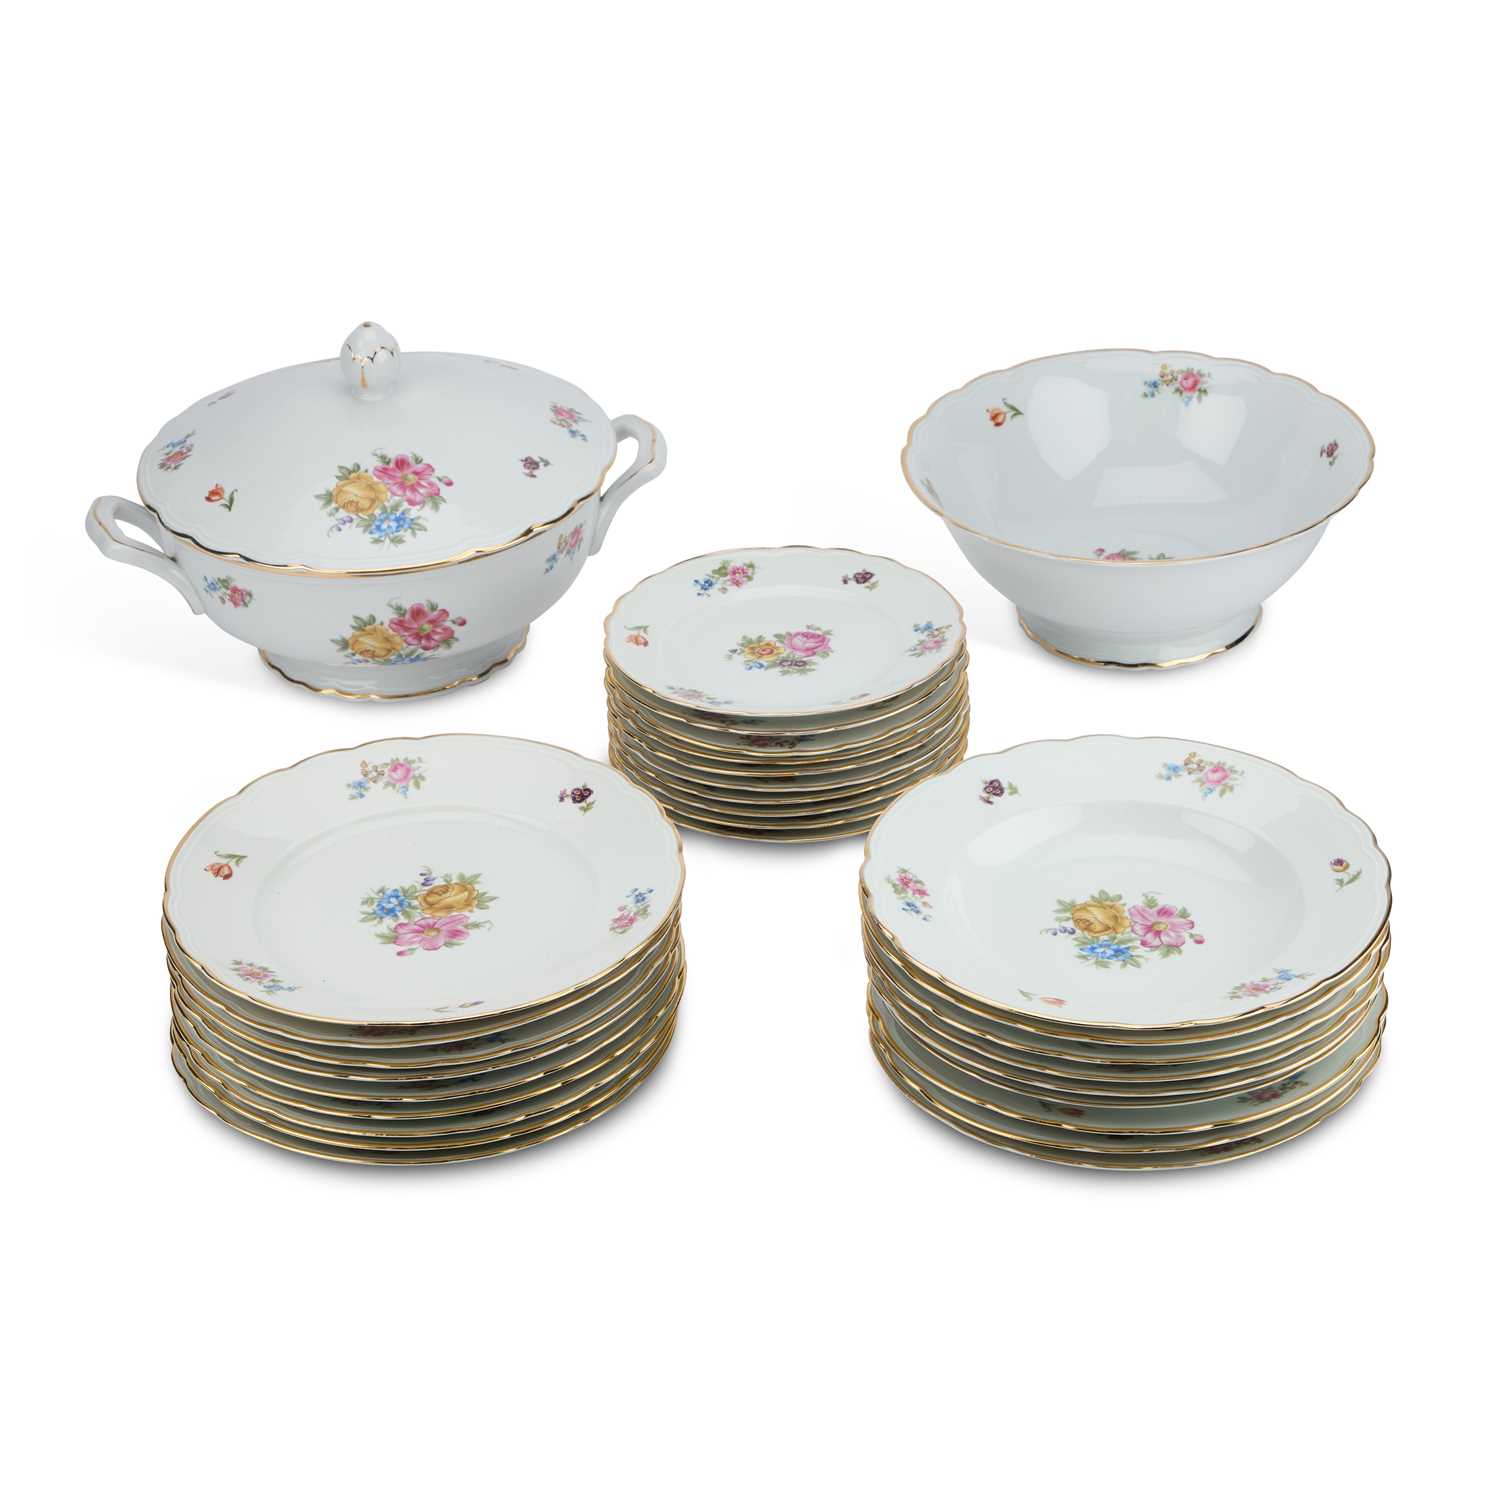 RICHARD GINORI (ITALY), A VERY RARE FLORAL PATTERN DINNER SERVICE - Image 2 of 5